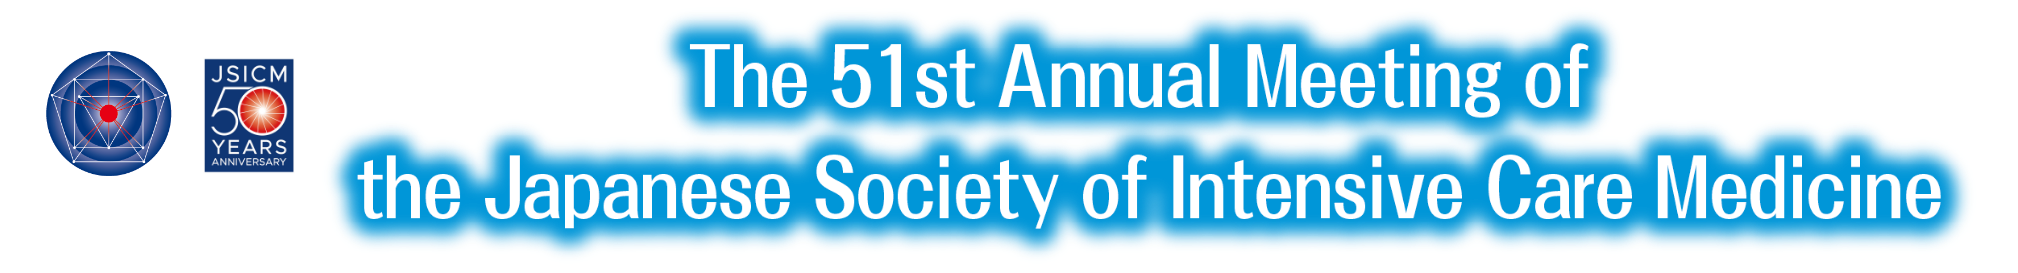 The 51st Annual Meeting of the Japanese Society of Intensive Care Medicine